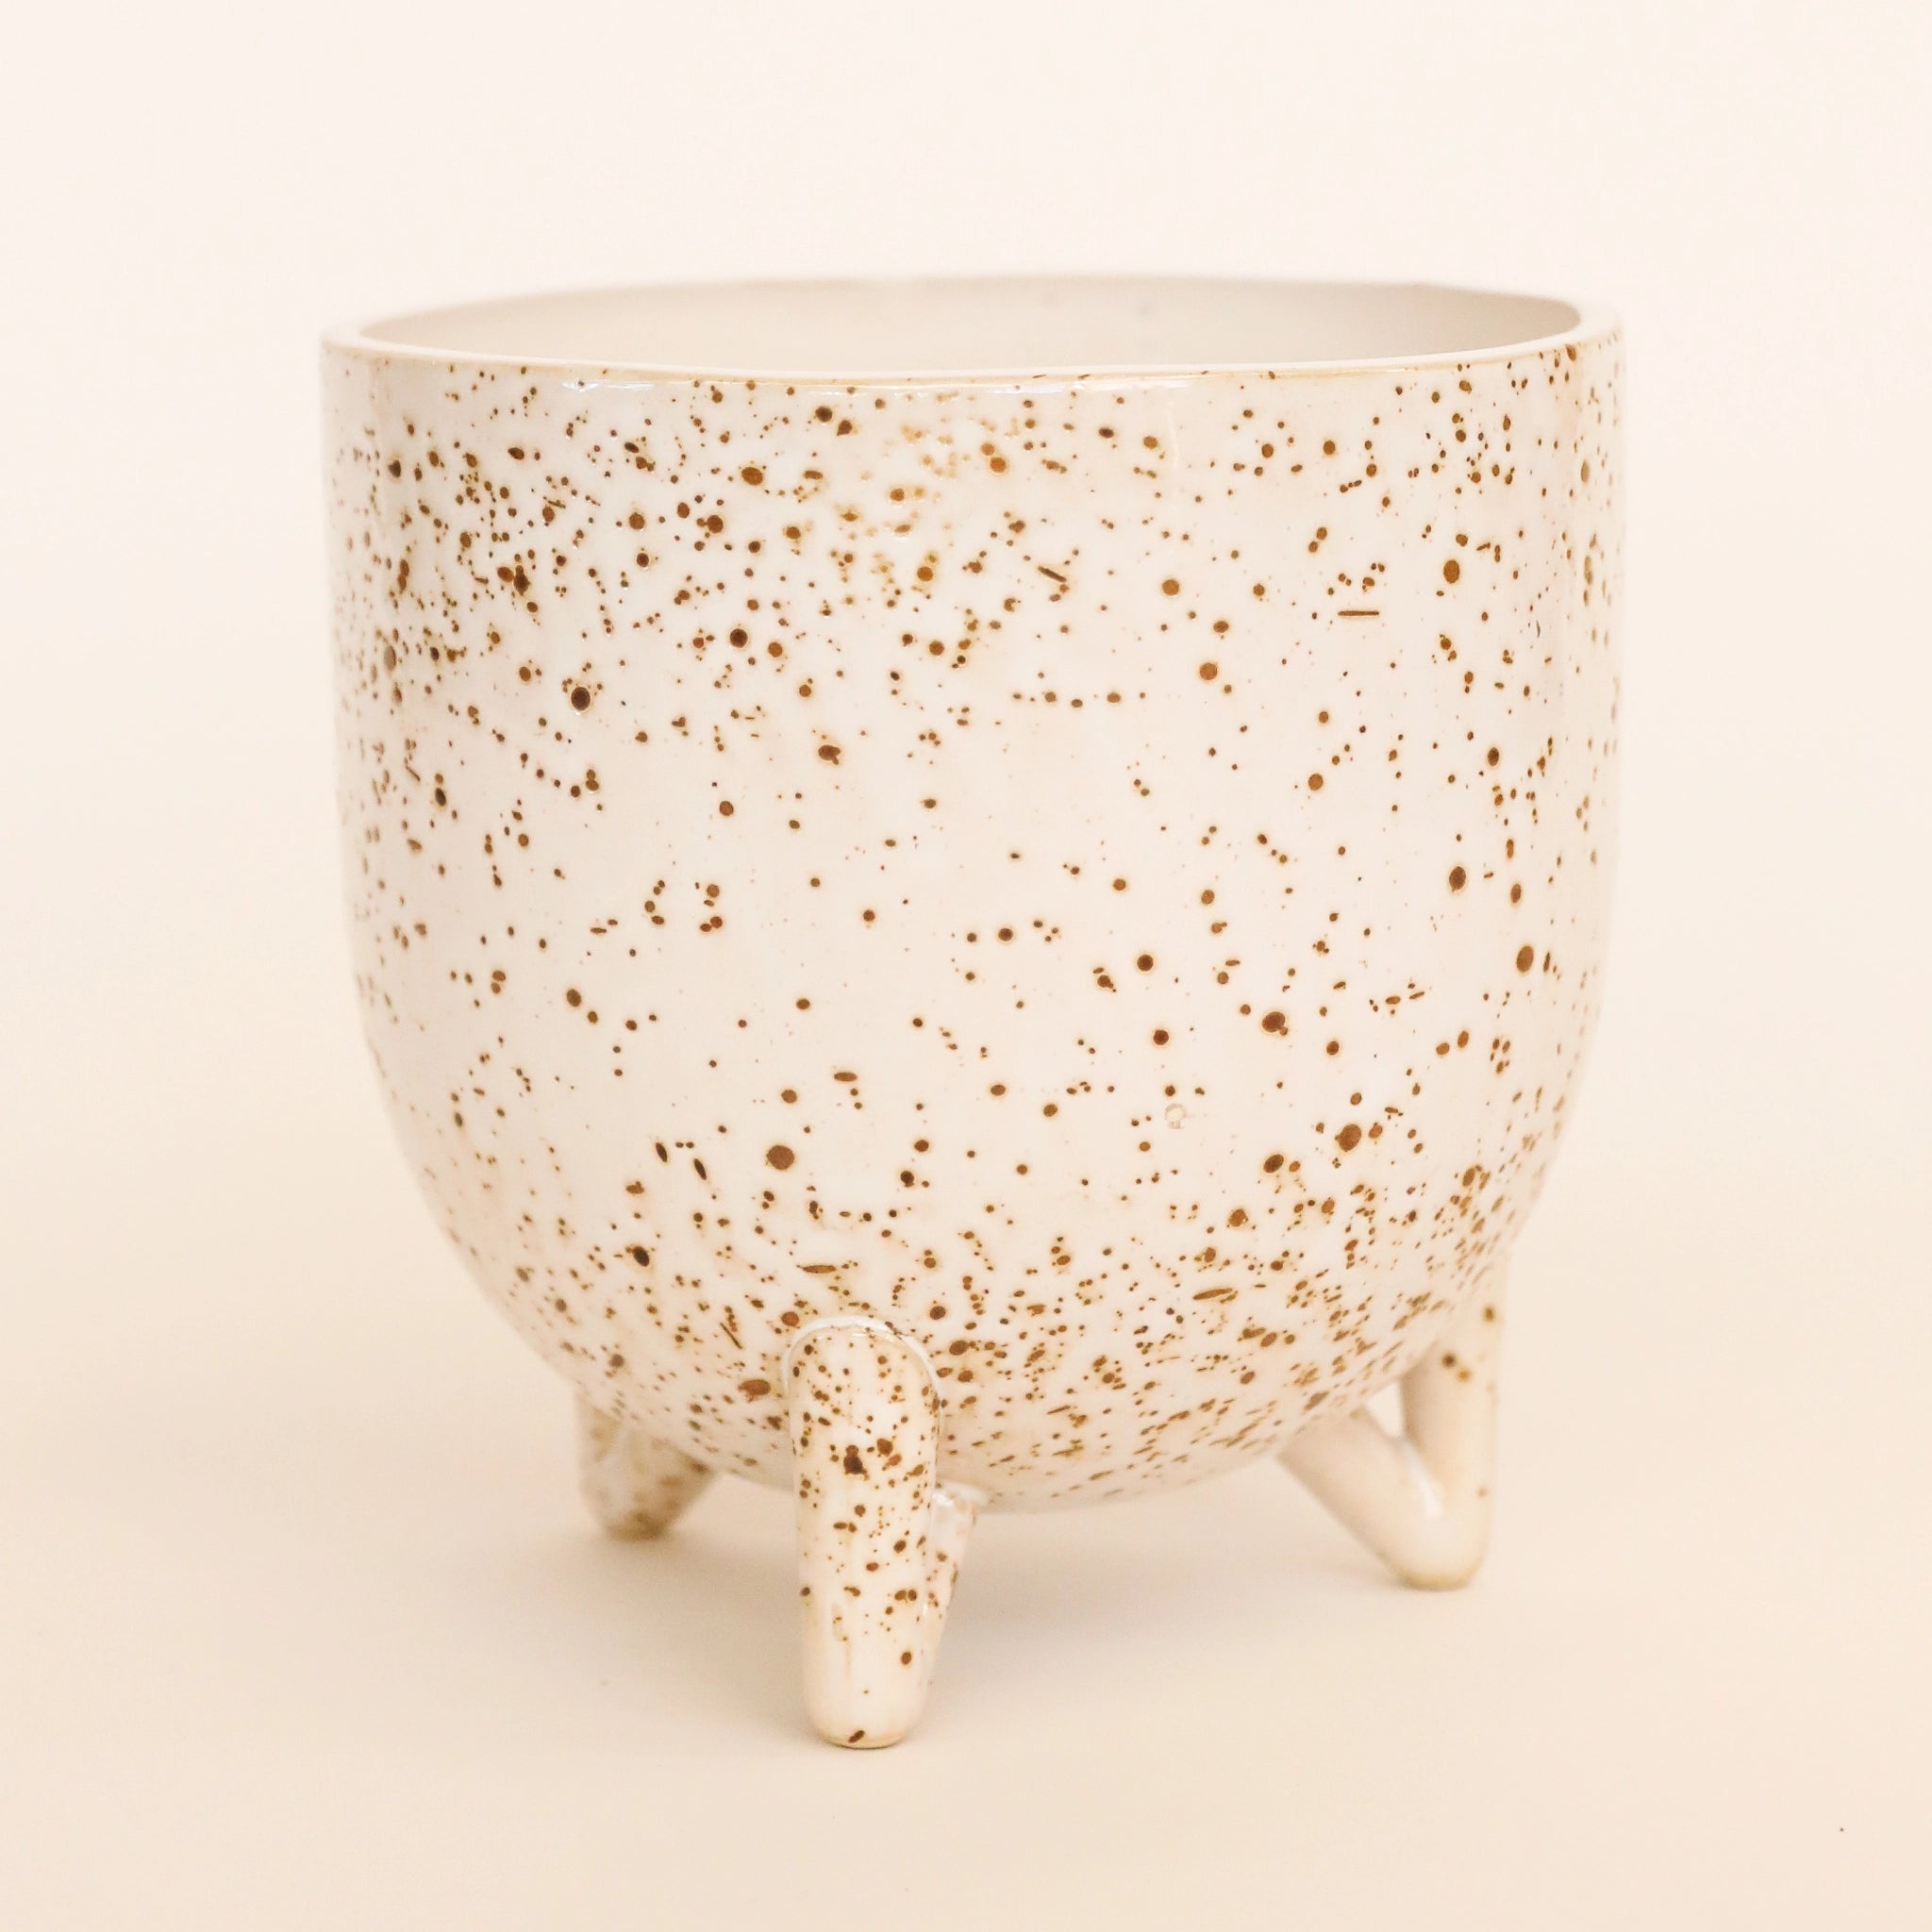 In front of a white background is a round footed pot. The pot is a cream color with dark brown specks. Seen from this view is three of the four feet at the bottom of the pot.